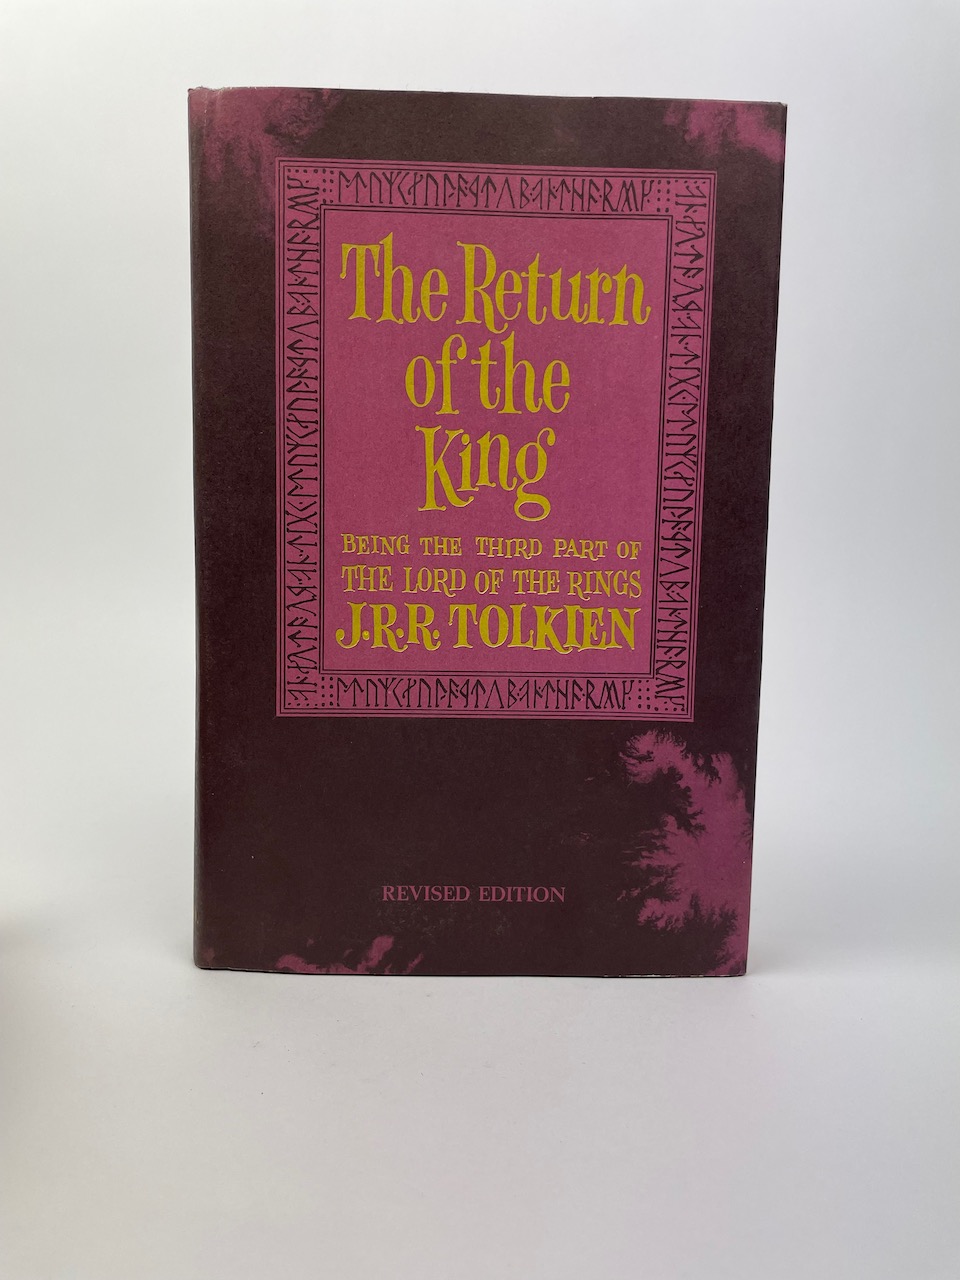 Lord of the Rings, 2nd US Edition in Original Publishers Slipcase and with Dustjackets 30